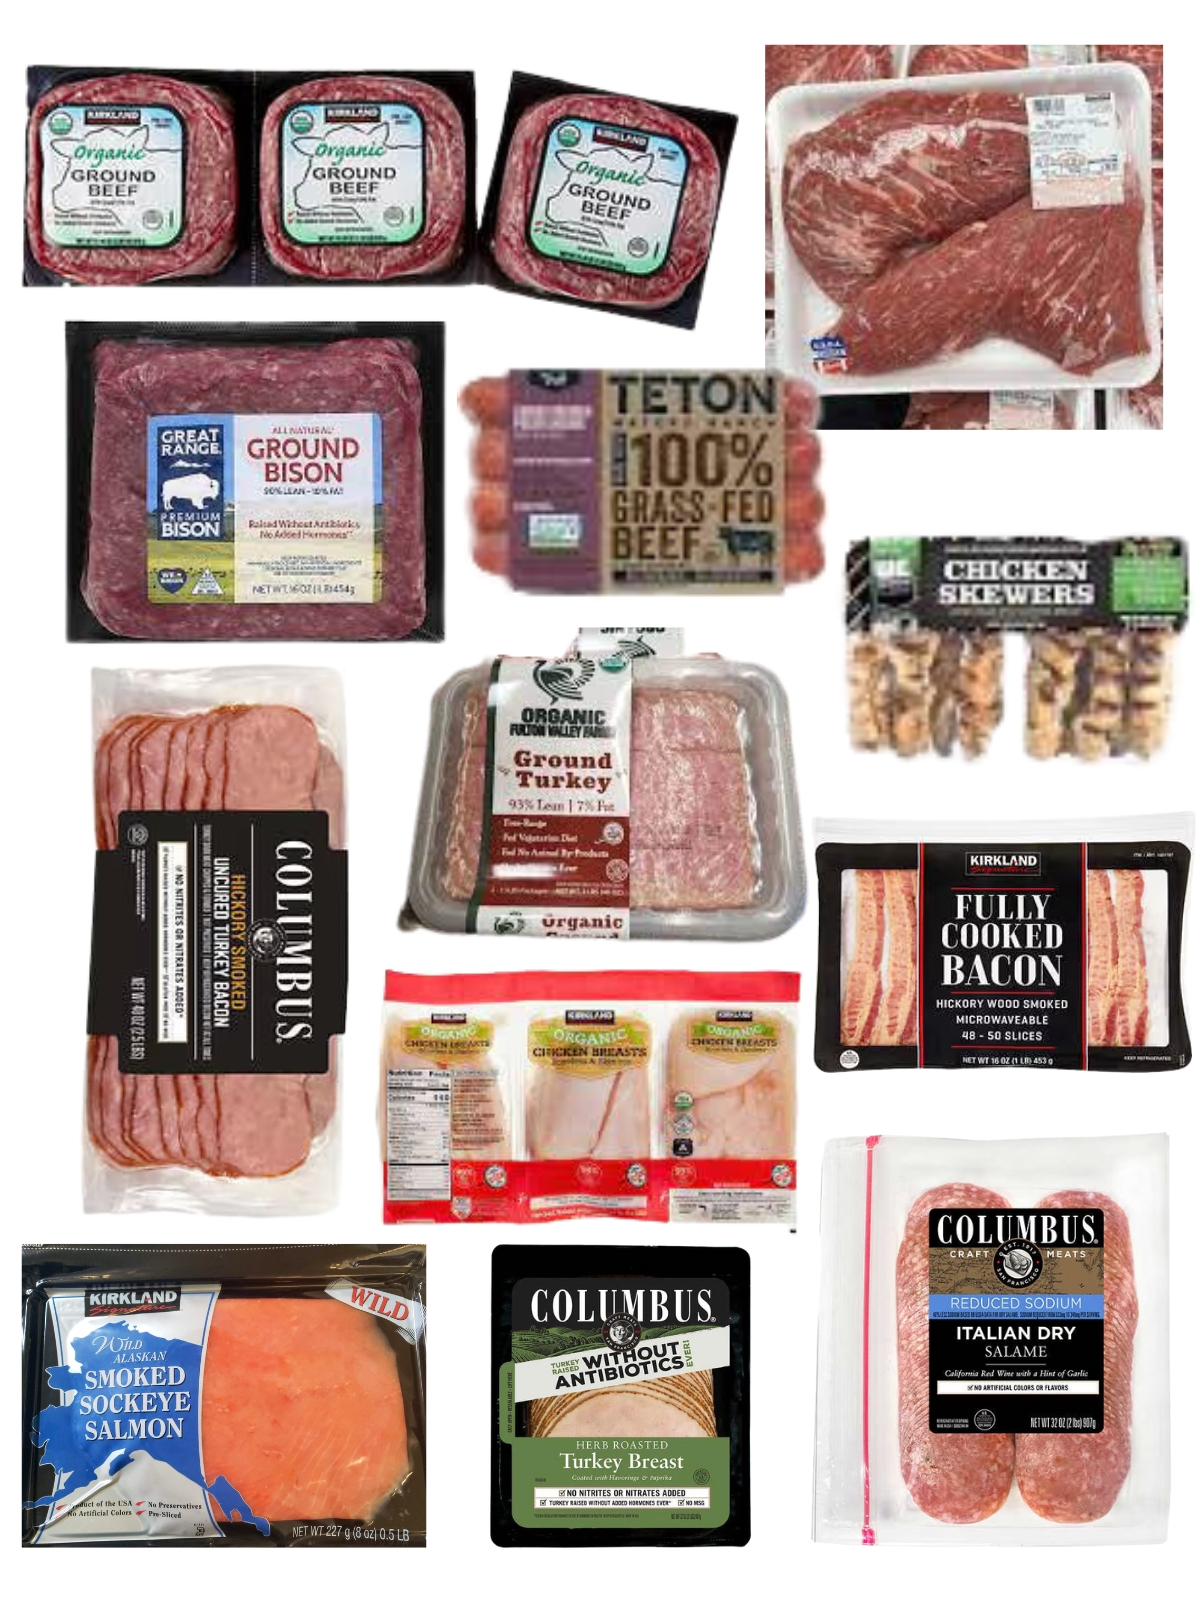 deli meats and fresh meats available at Costo